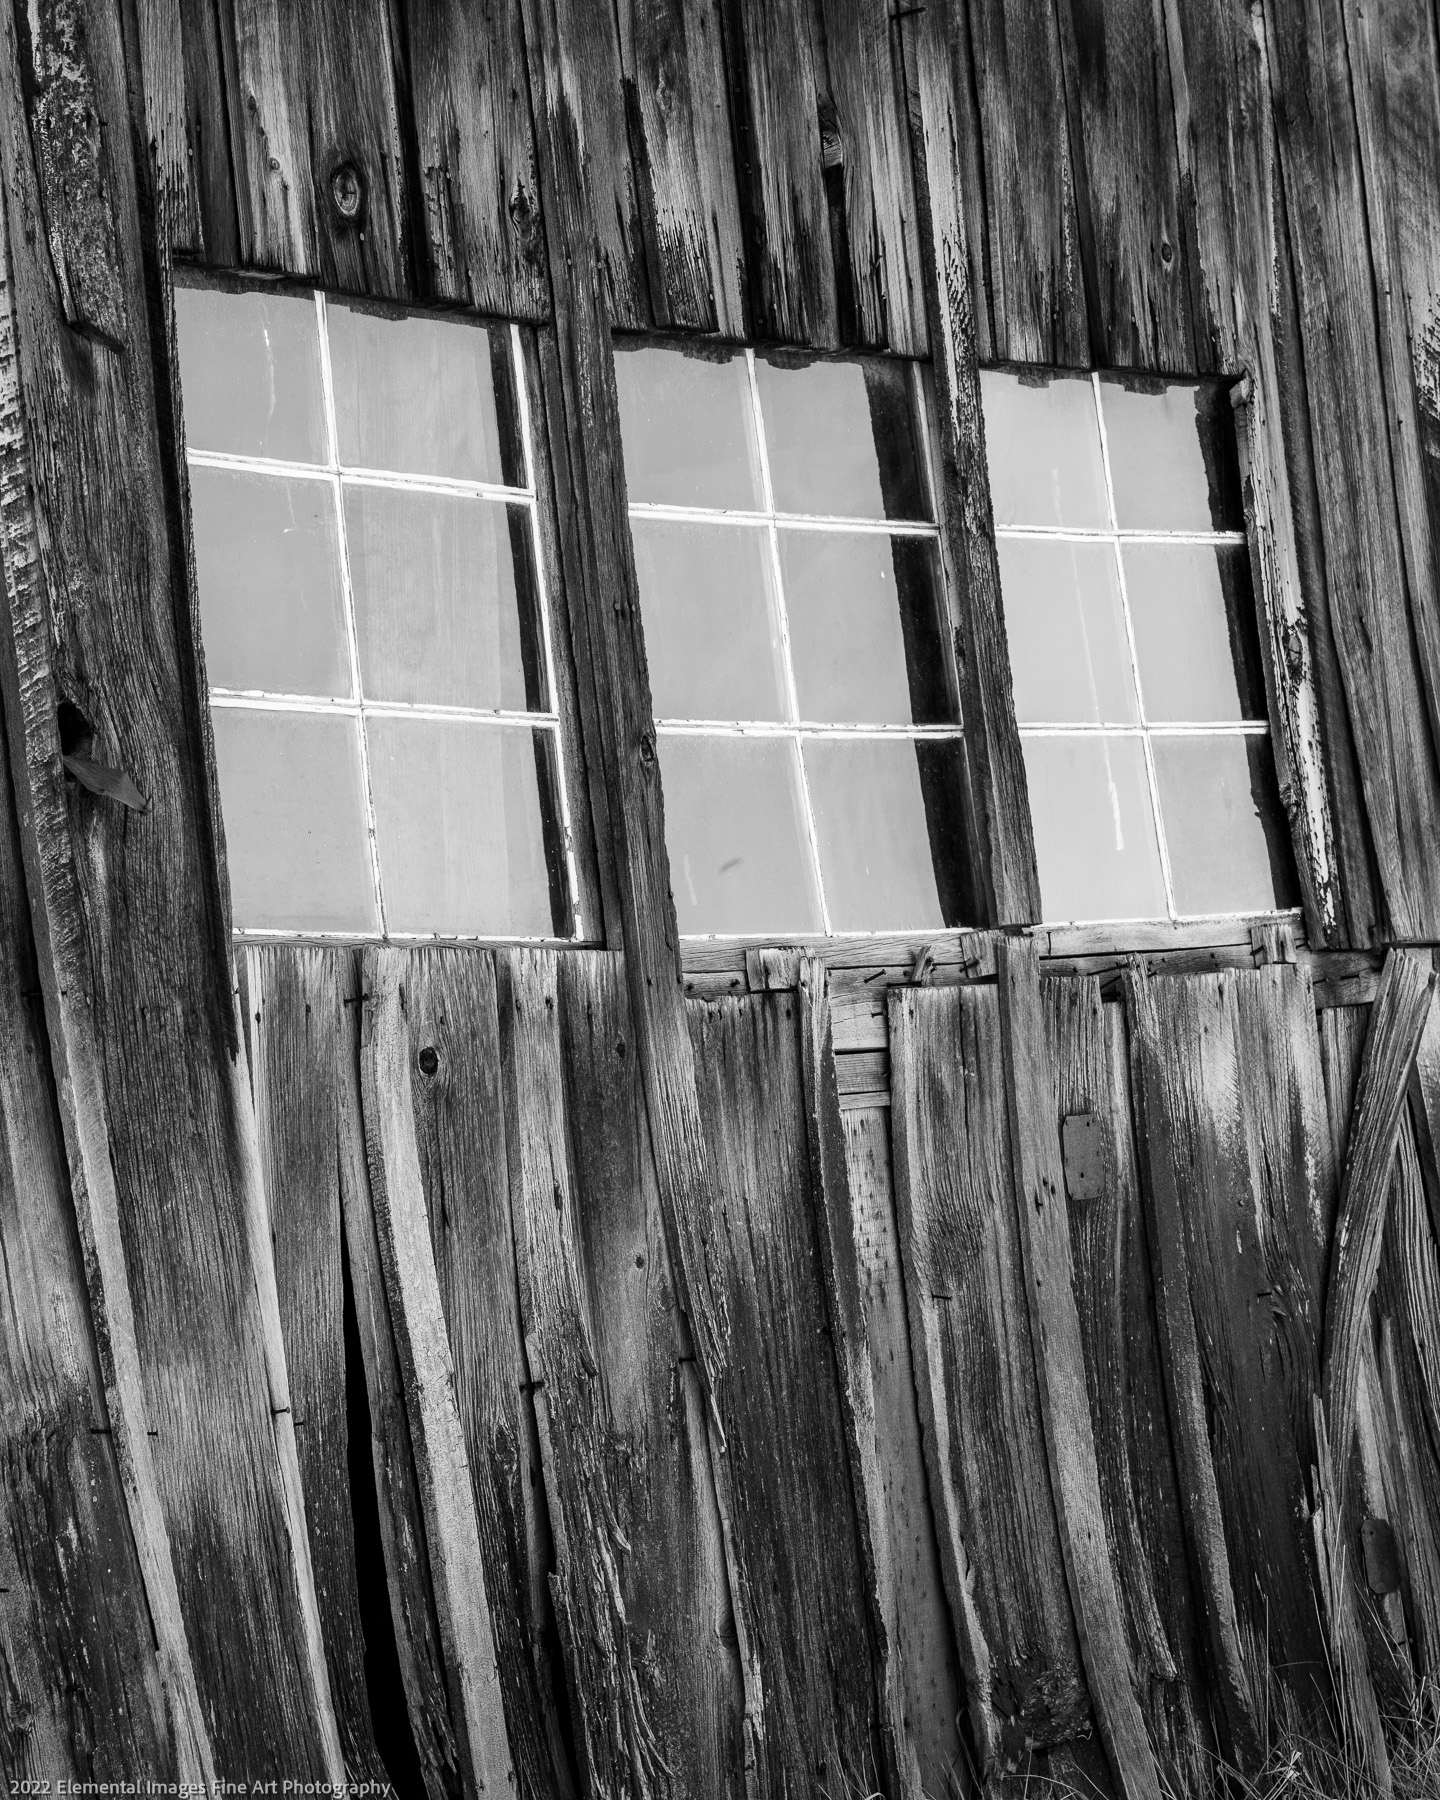 Three Windows | Bodie State Historic Park | CA | USA - © 2022 Elemental Images Fine Art Photography - All Rights Reserved Worldwide